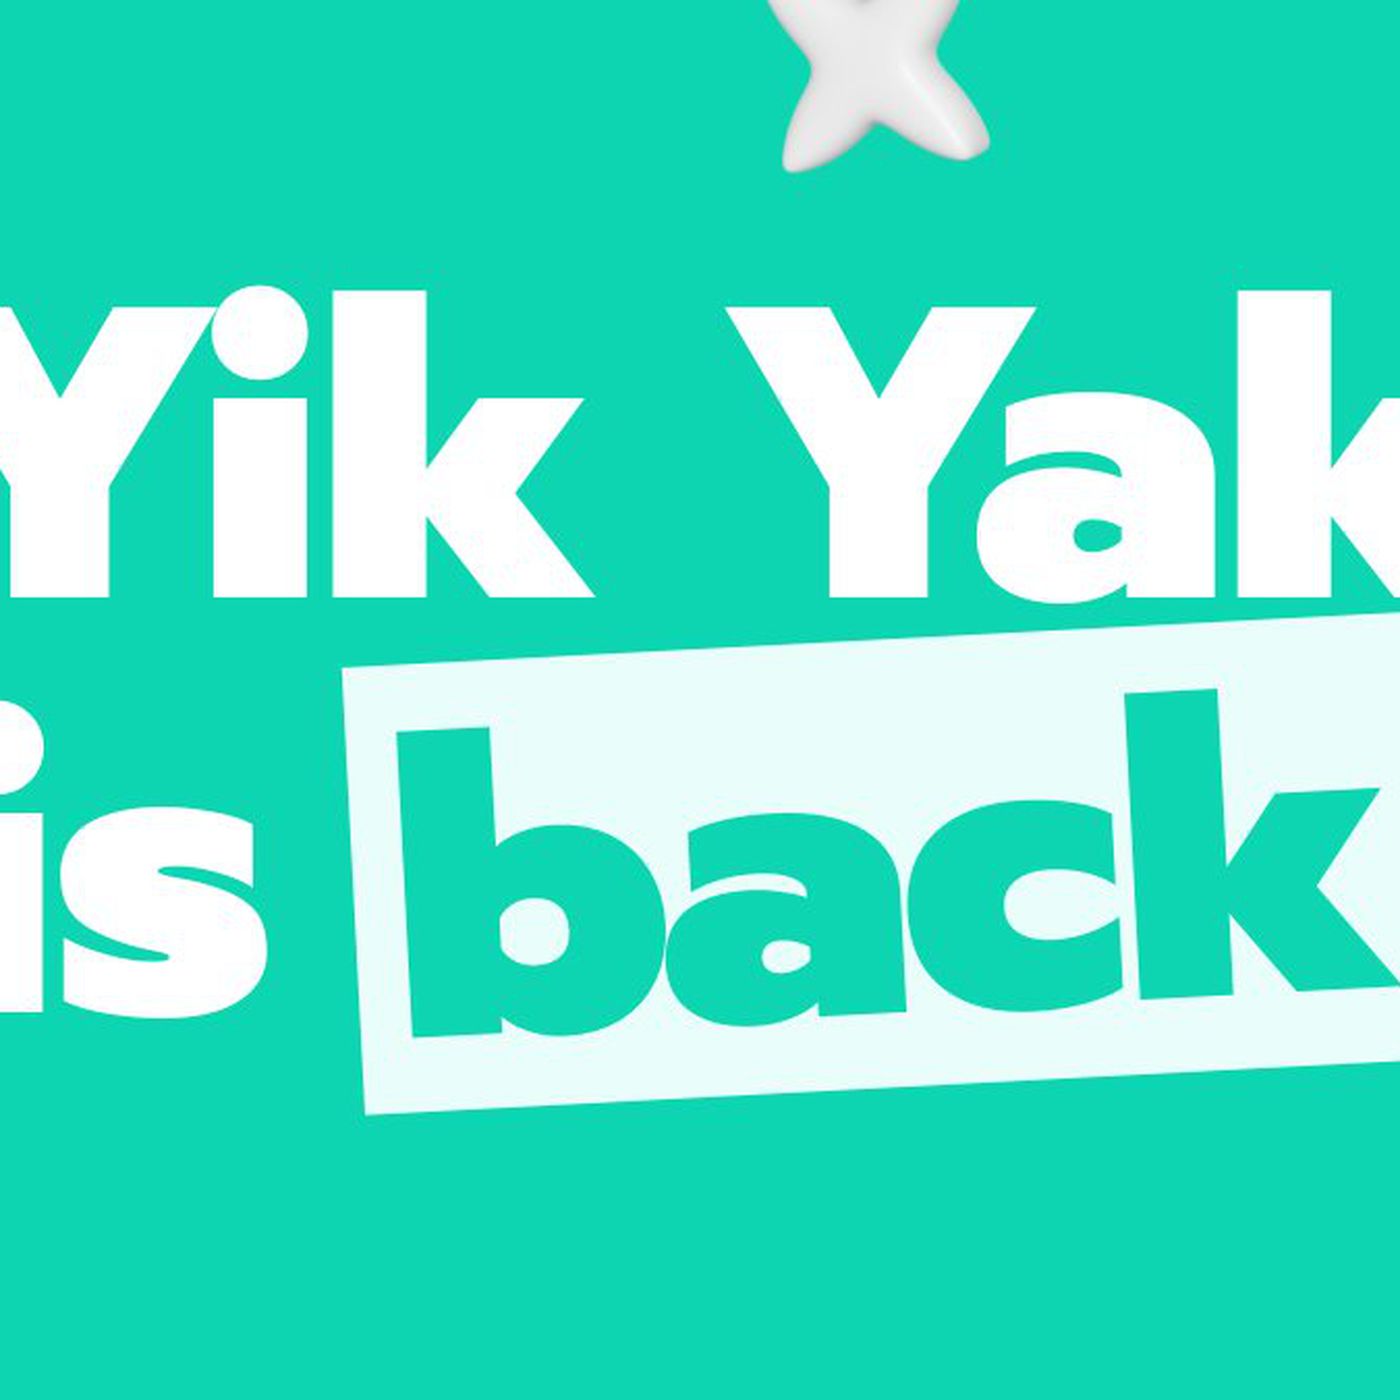 Local and anonymous social media app Yik Yak is back